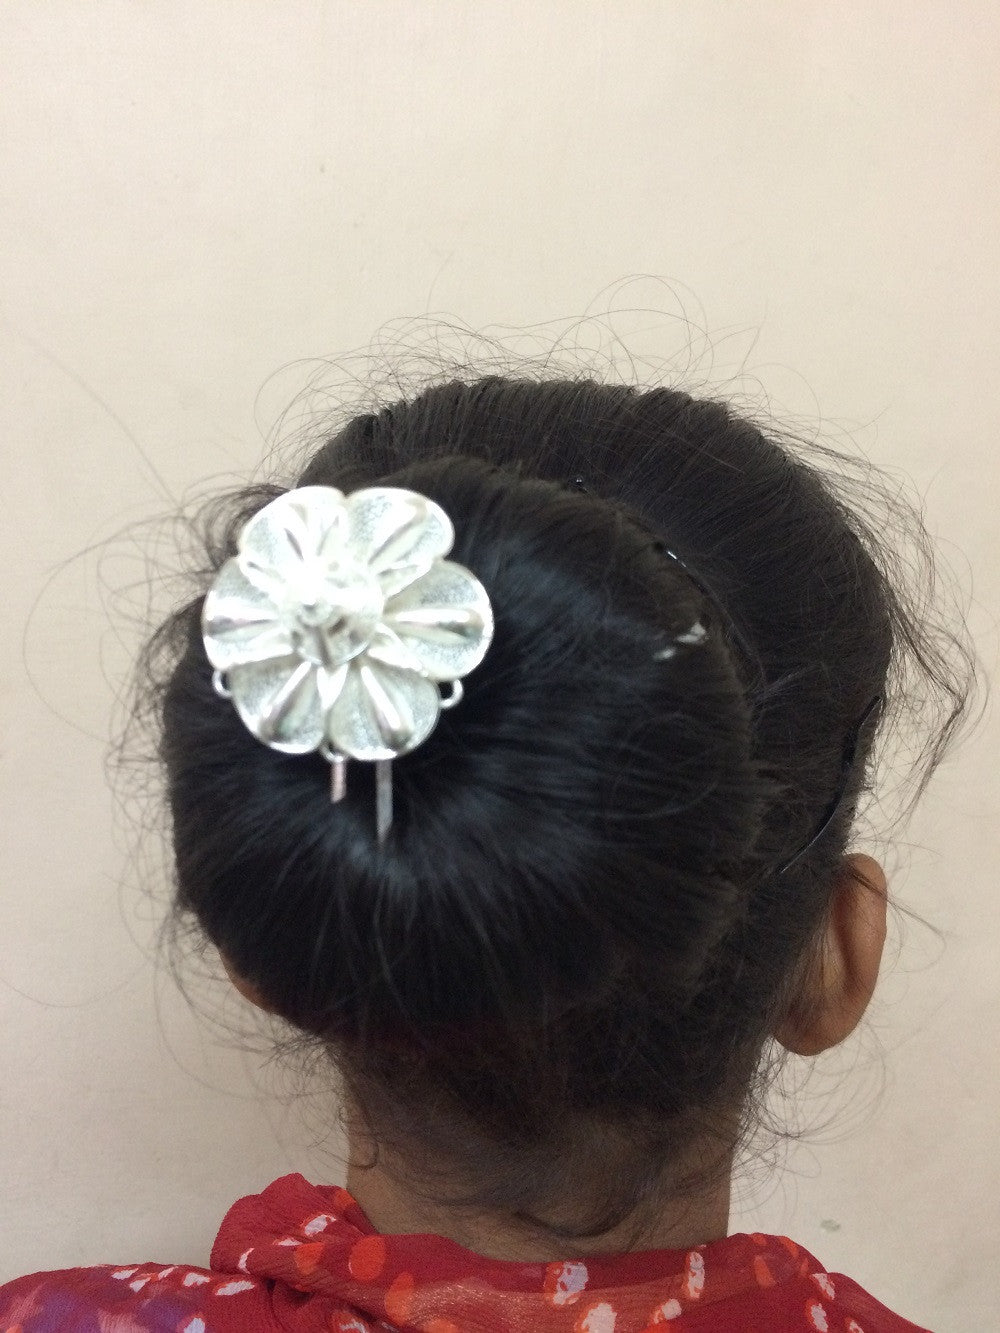 Load image into Gallery viewer, Silver hair accessories
